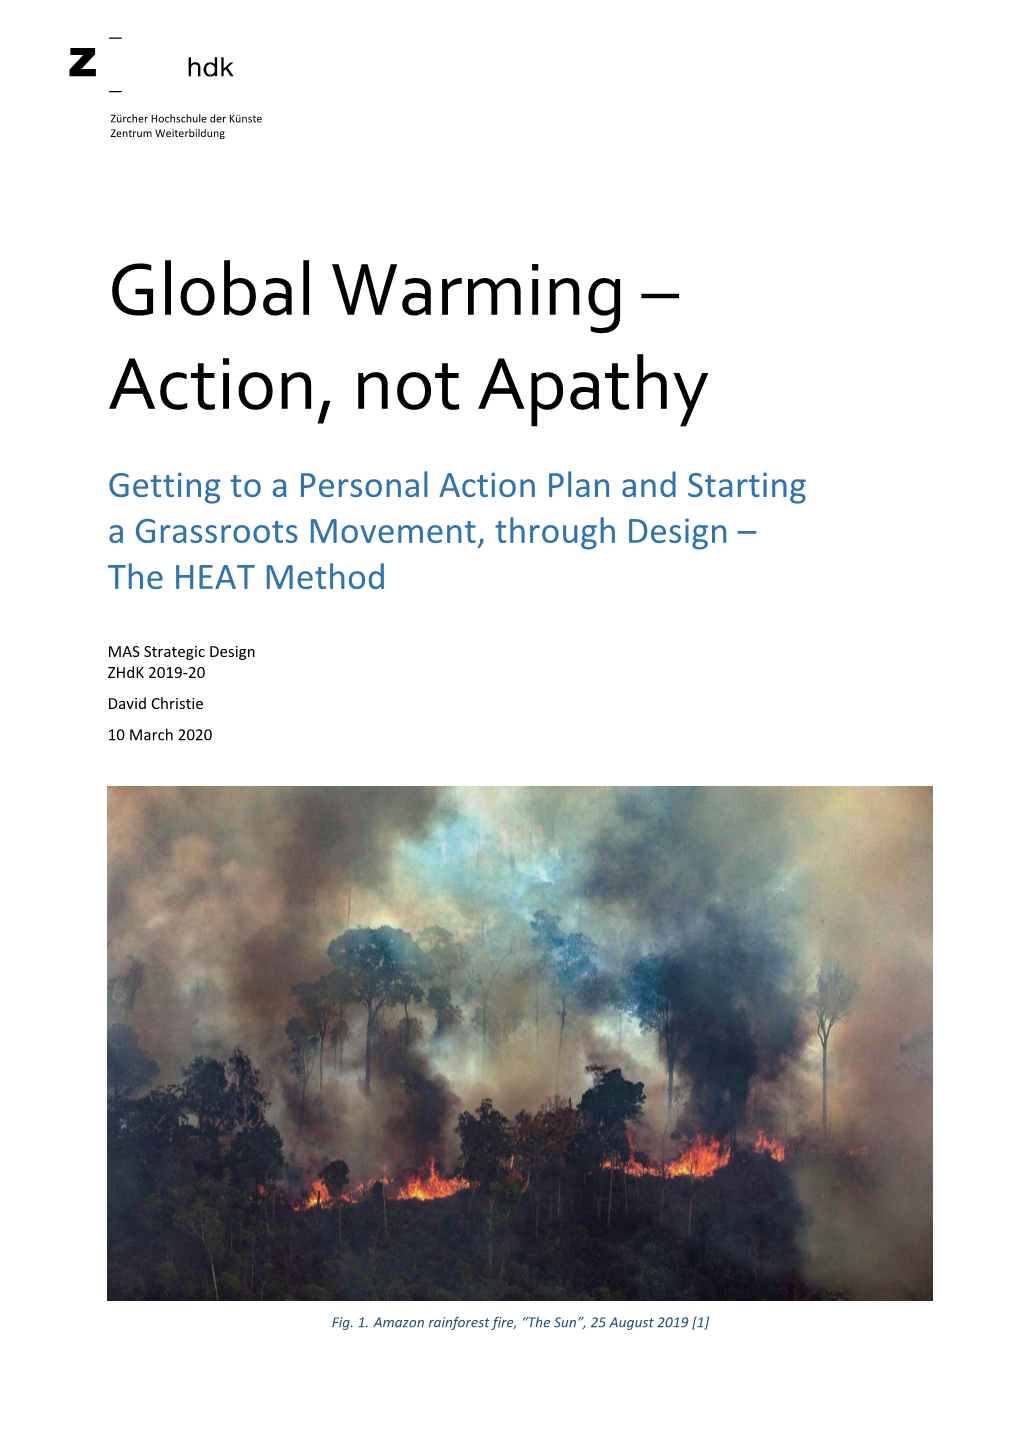 Global Warming – Action, Not Apathy – the HEAT Method